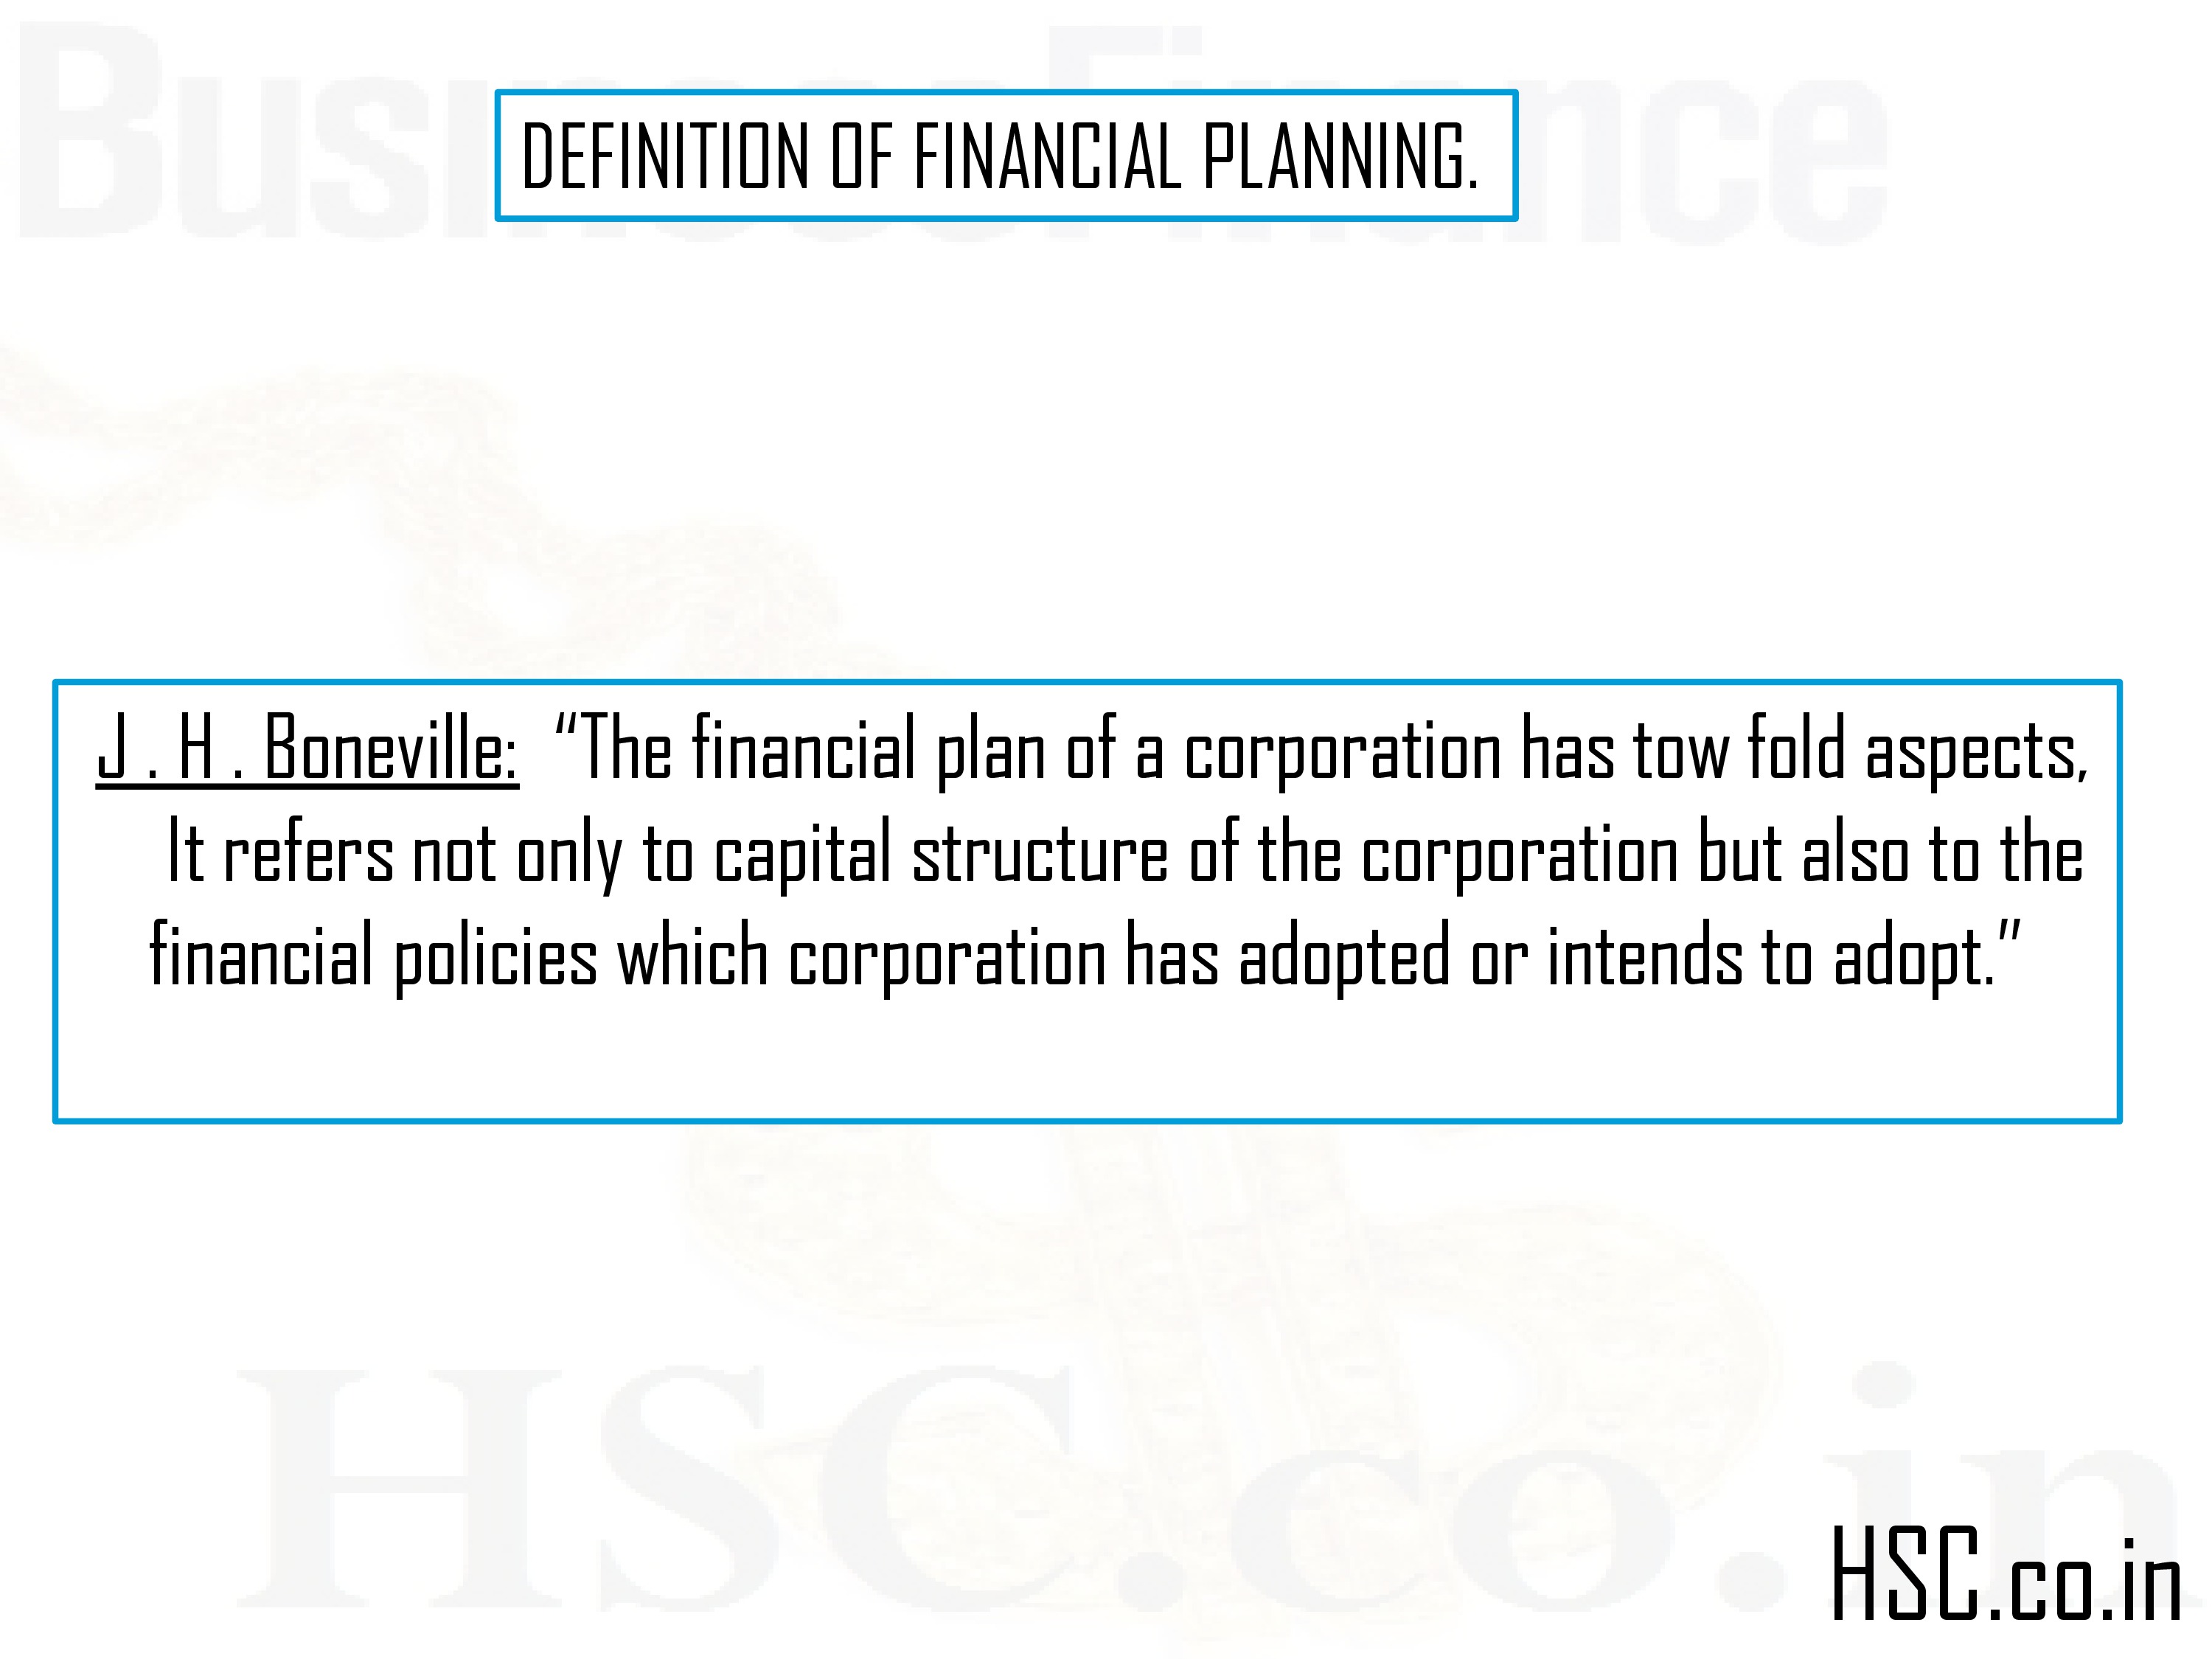 DEFINITION OF FINANCIAL PLANNING